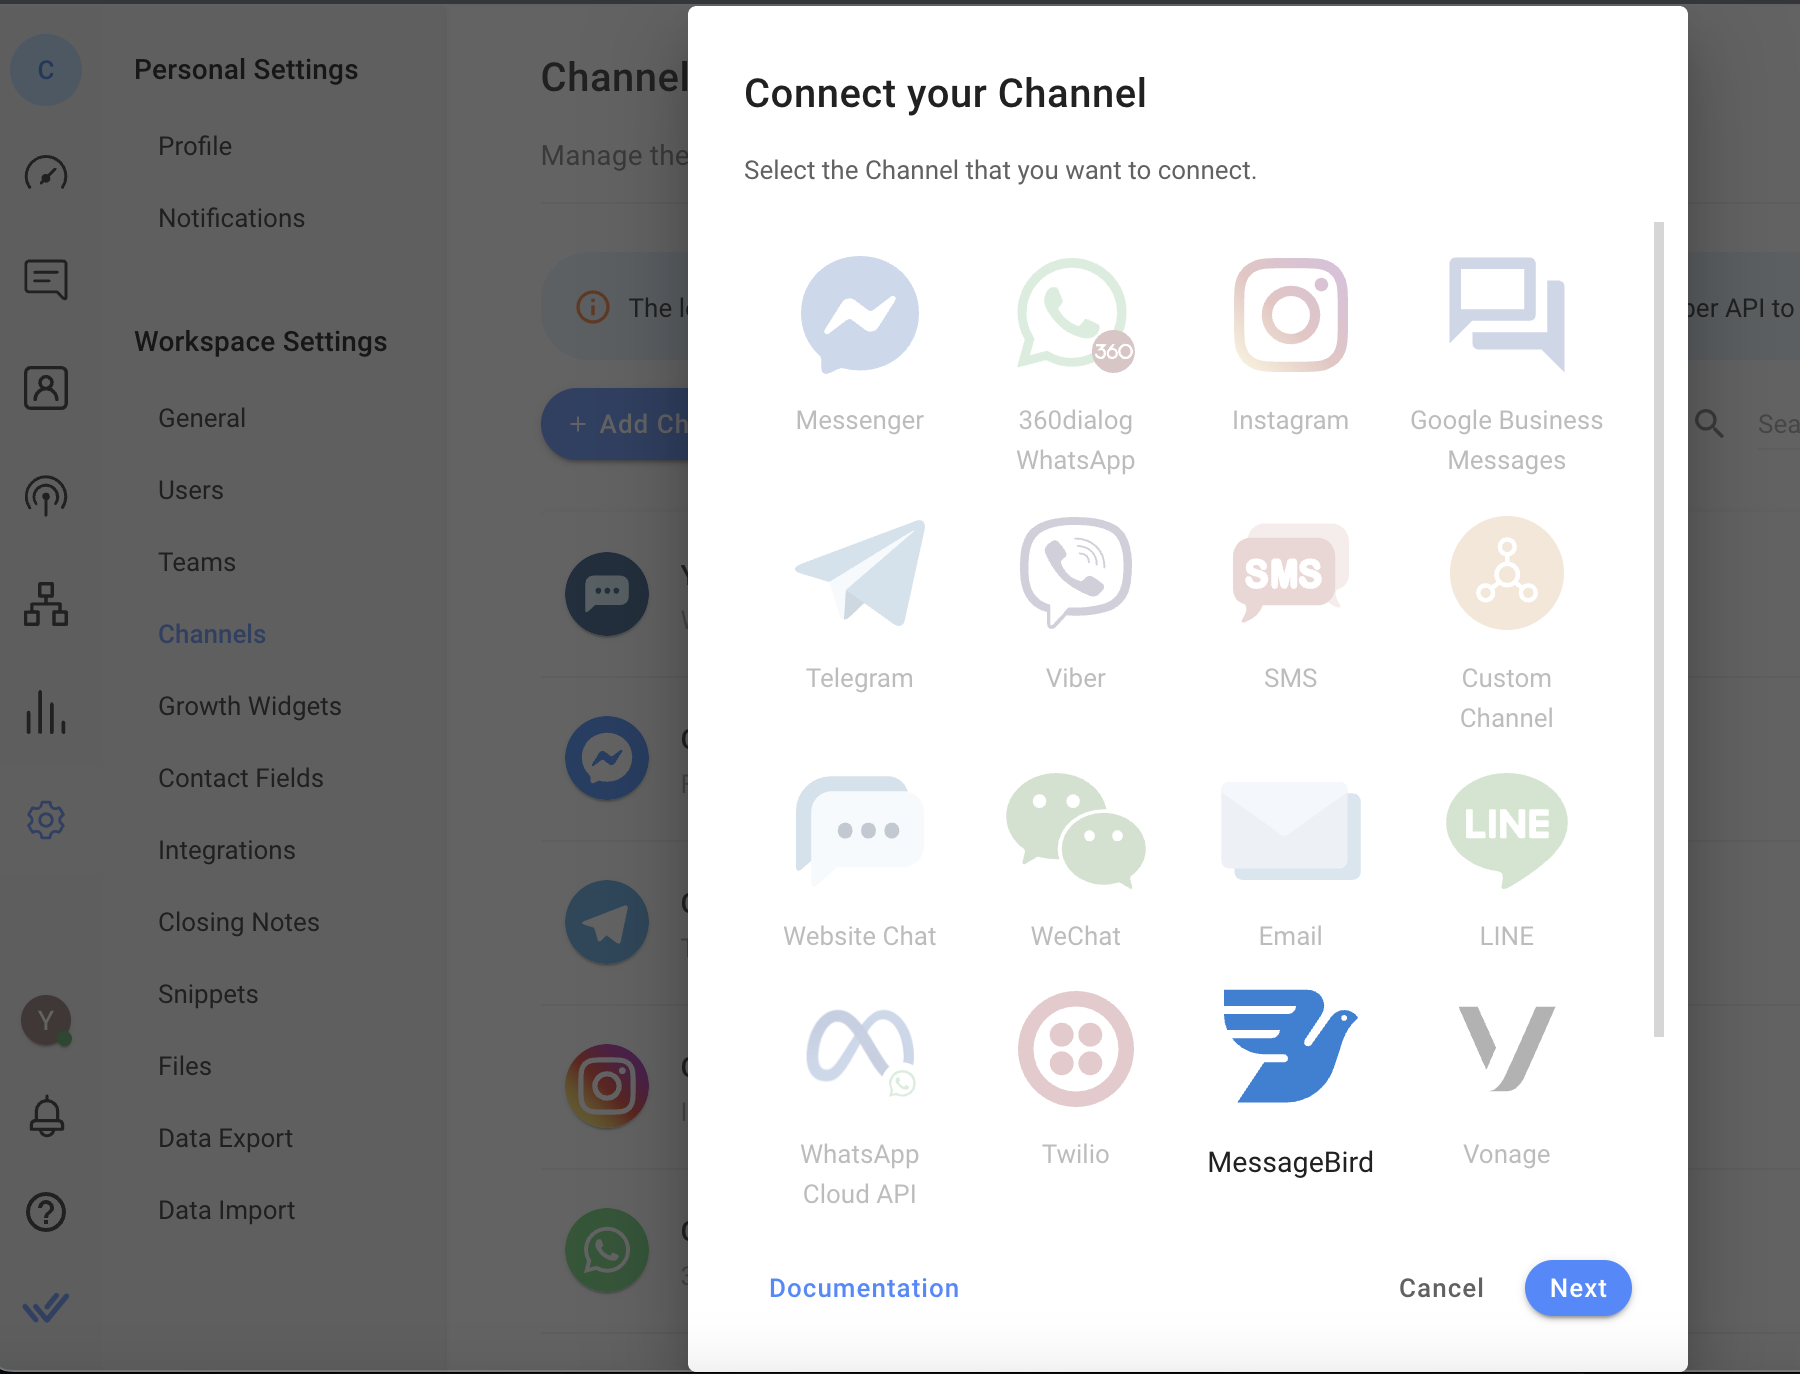 Connect your Channel dialog